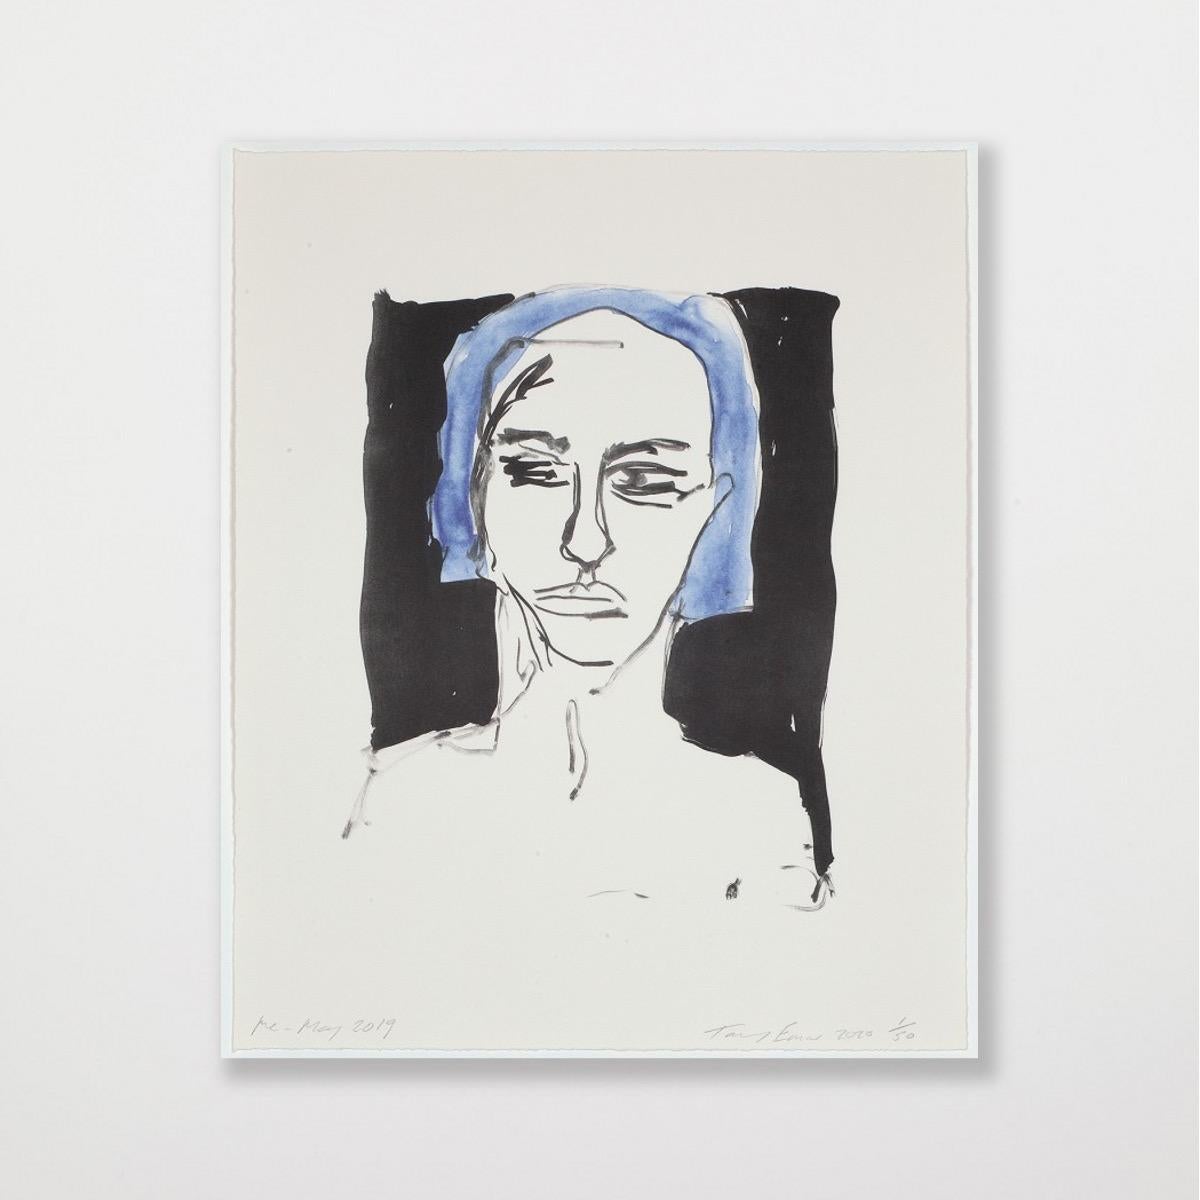 Me - May 2019 - Emin, Contemporary, YBAs, Lithograph, Portrait, Blue
2 colour lithograph on Somerset Velvet Warm White 400gsm
Edition of 50
55,5 x 45,5 cm (21.9 x 17.9 in)
Signed, numbered, and dated by the artist
In mint condition
With certificate